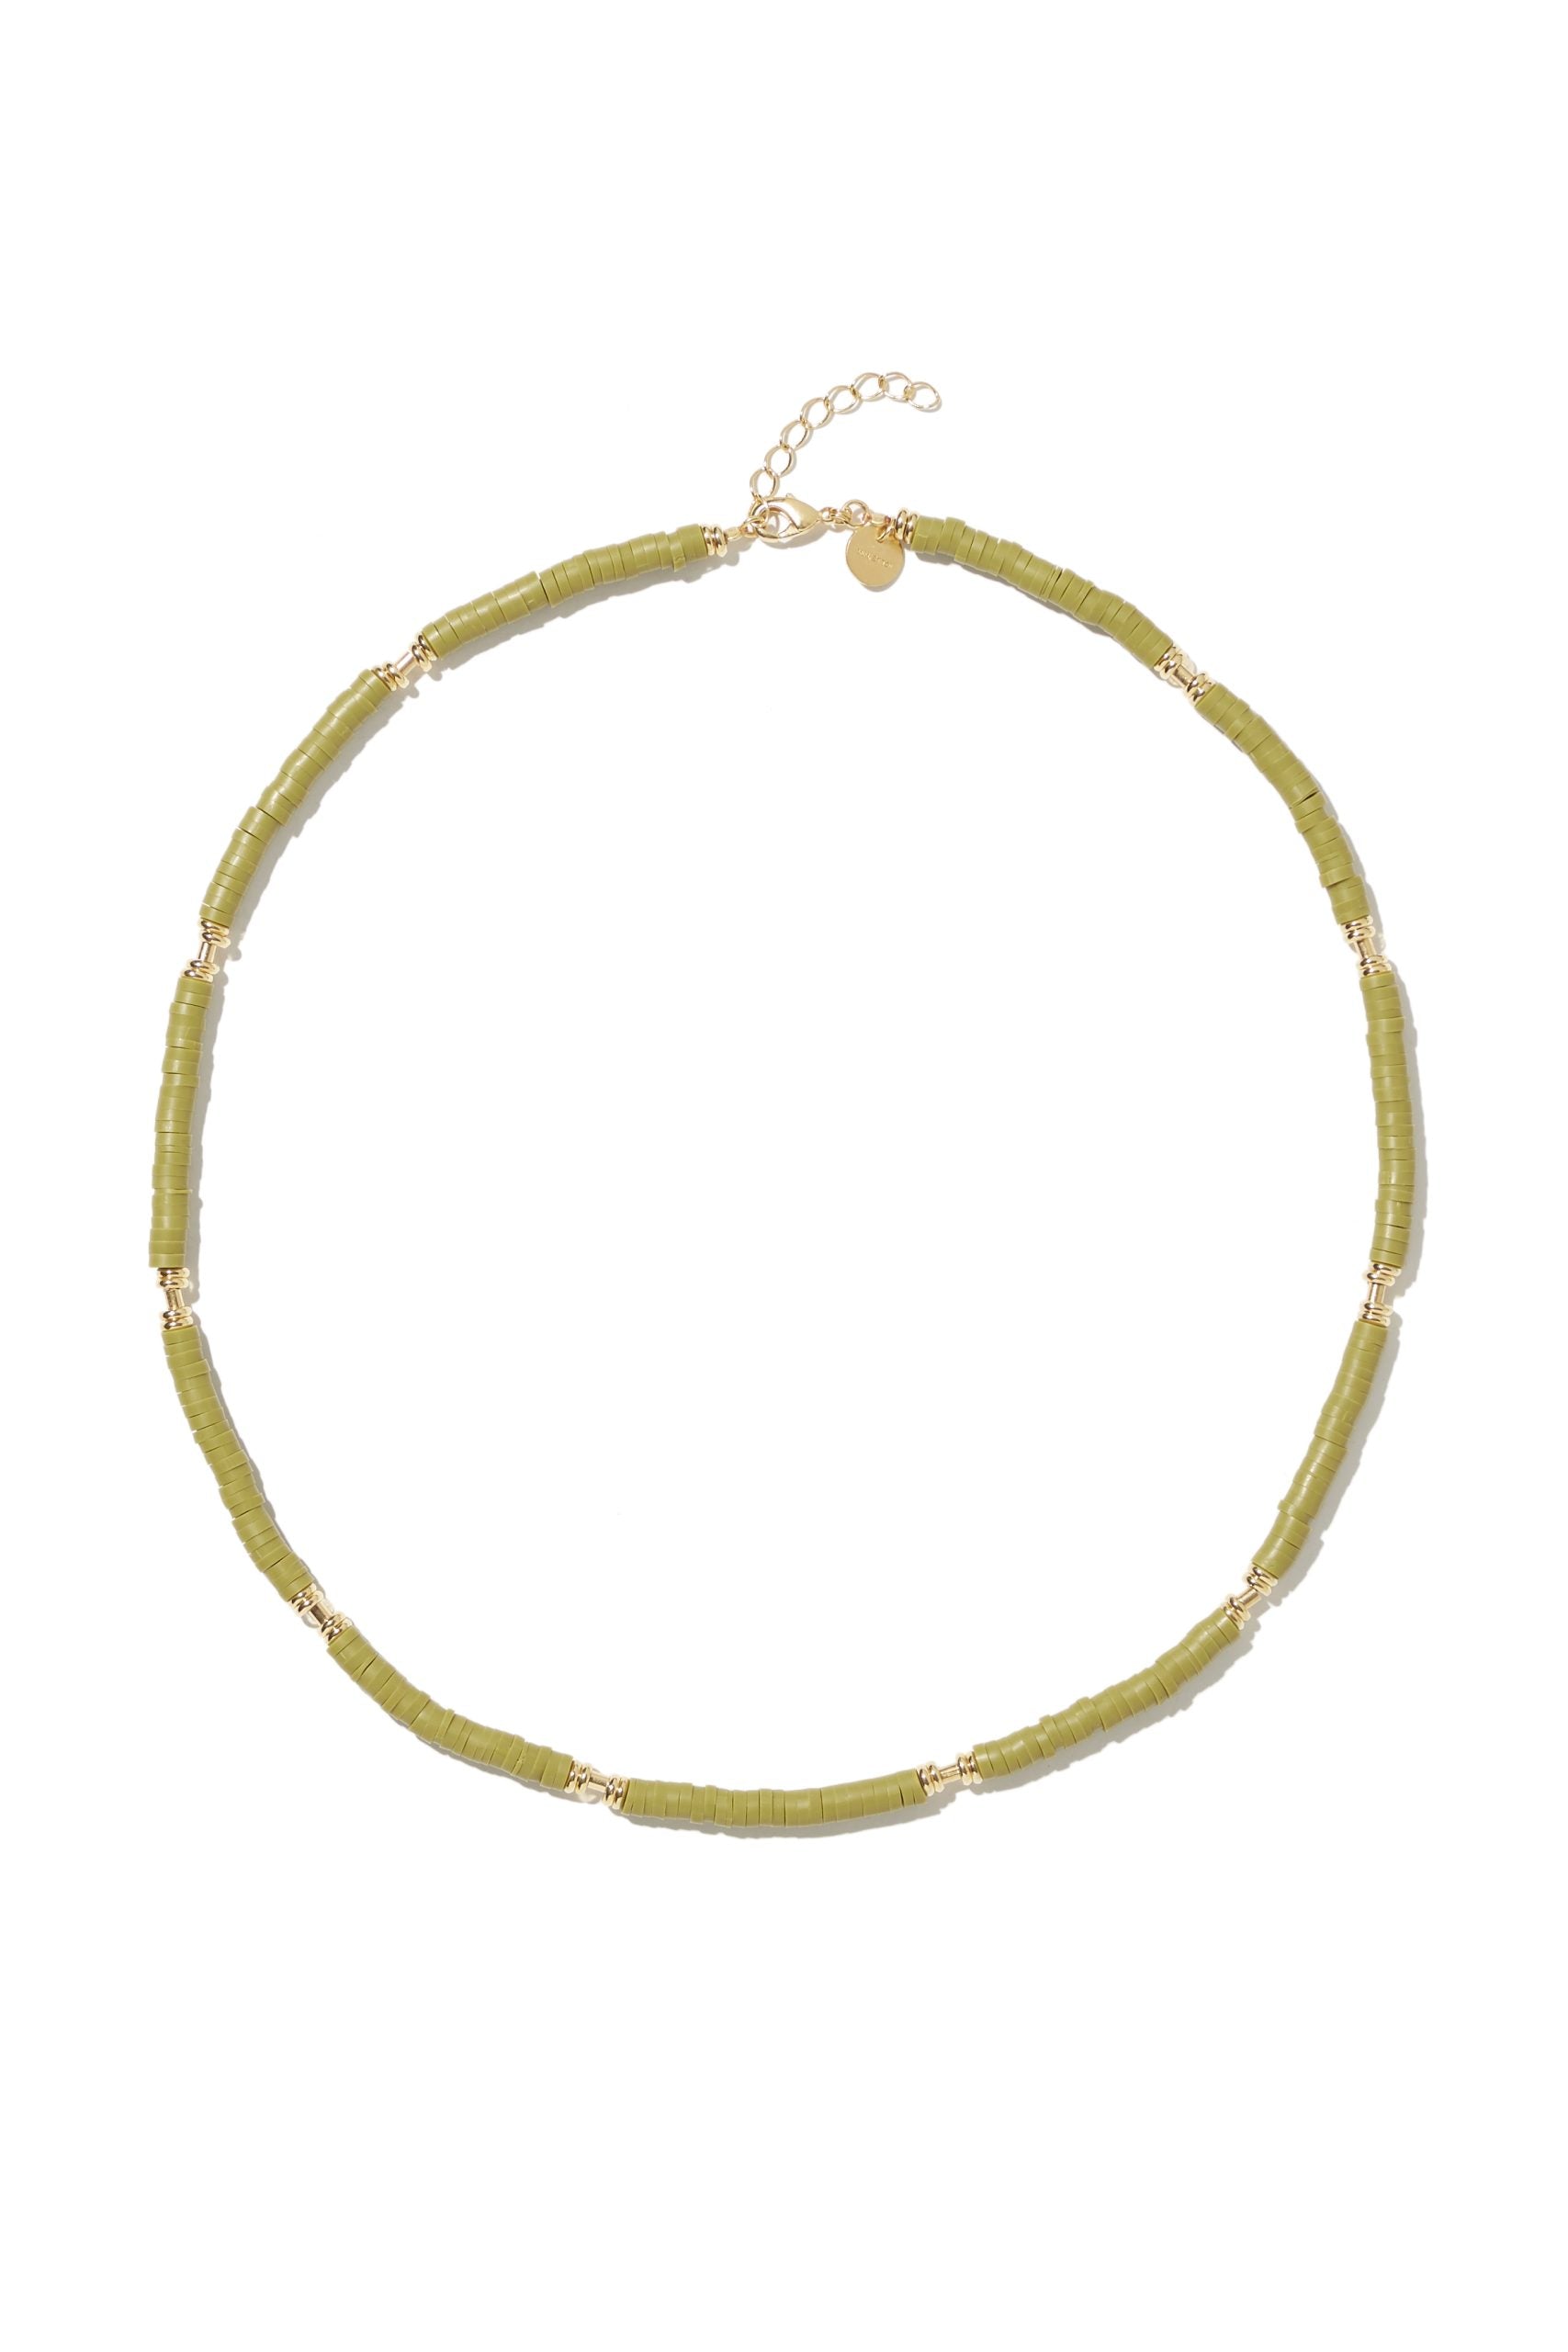 Kennedy green necklace